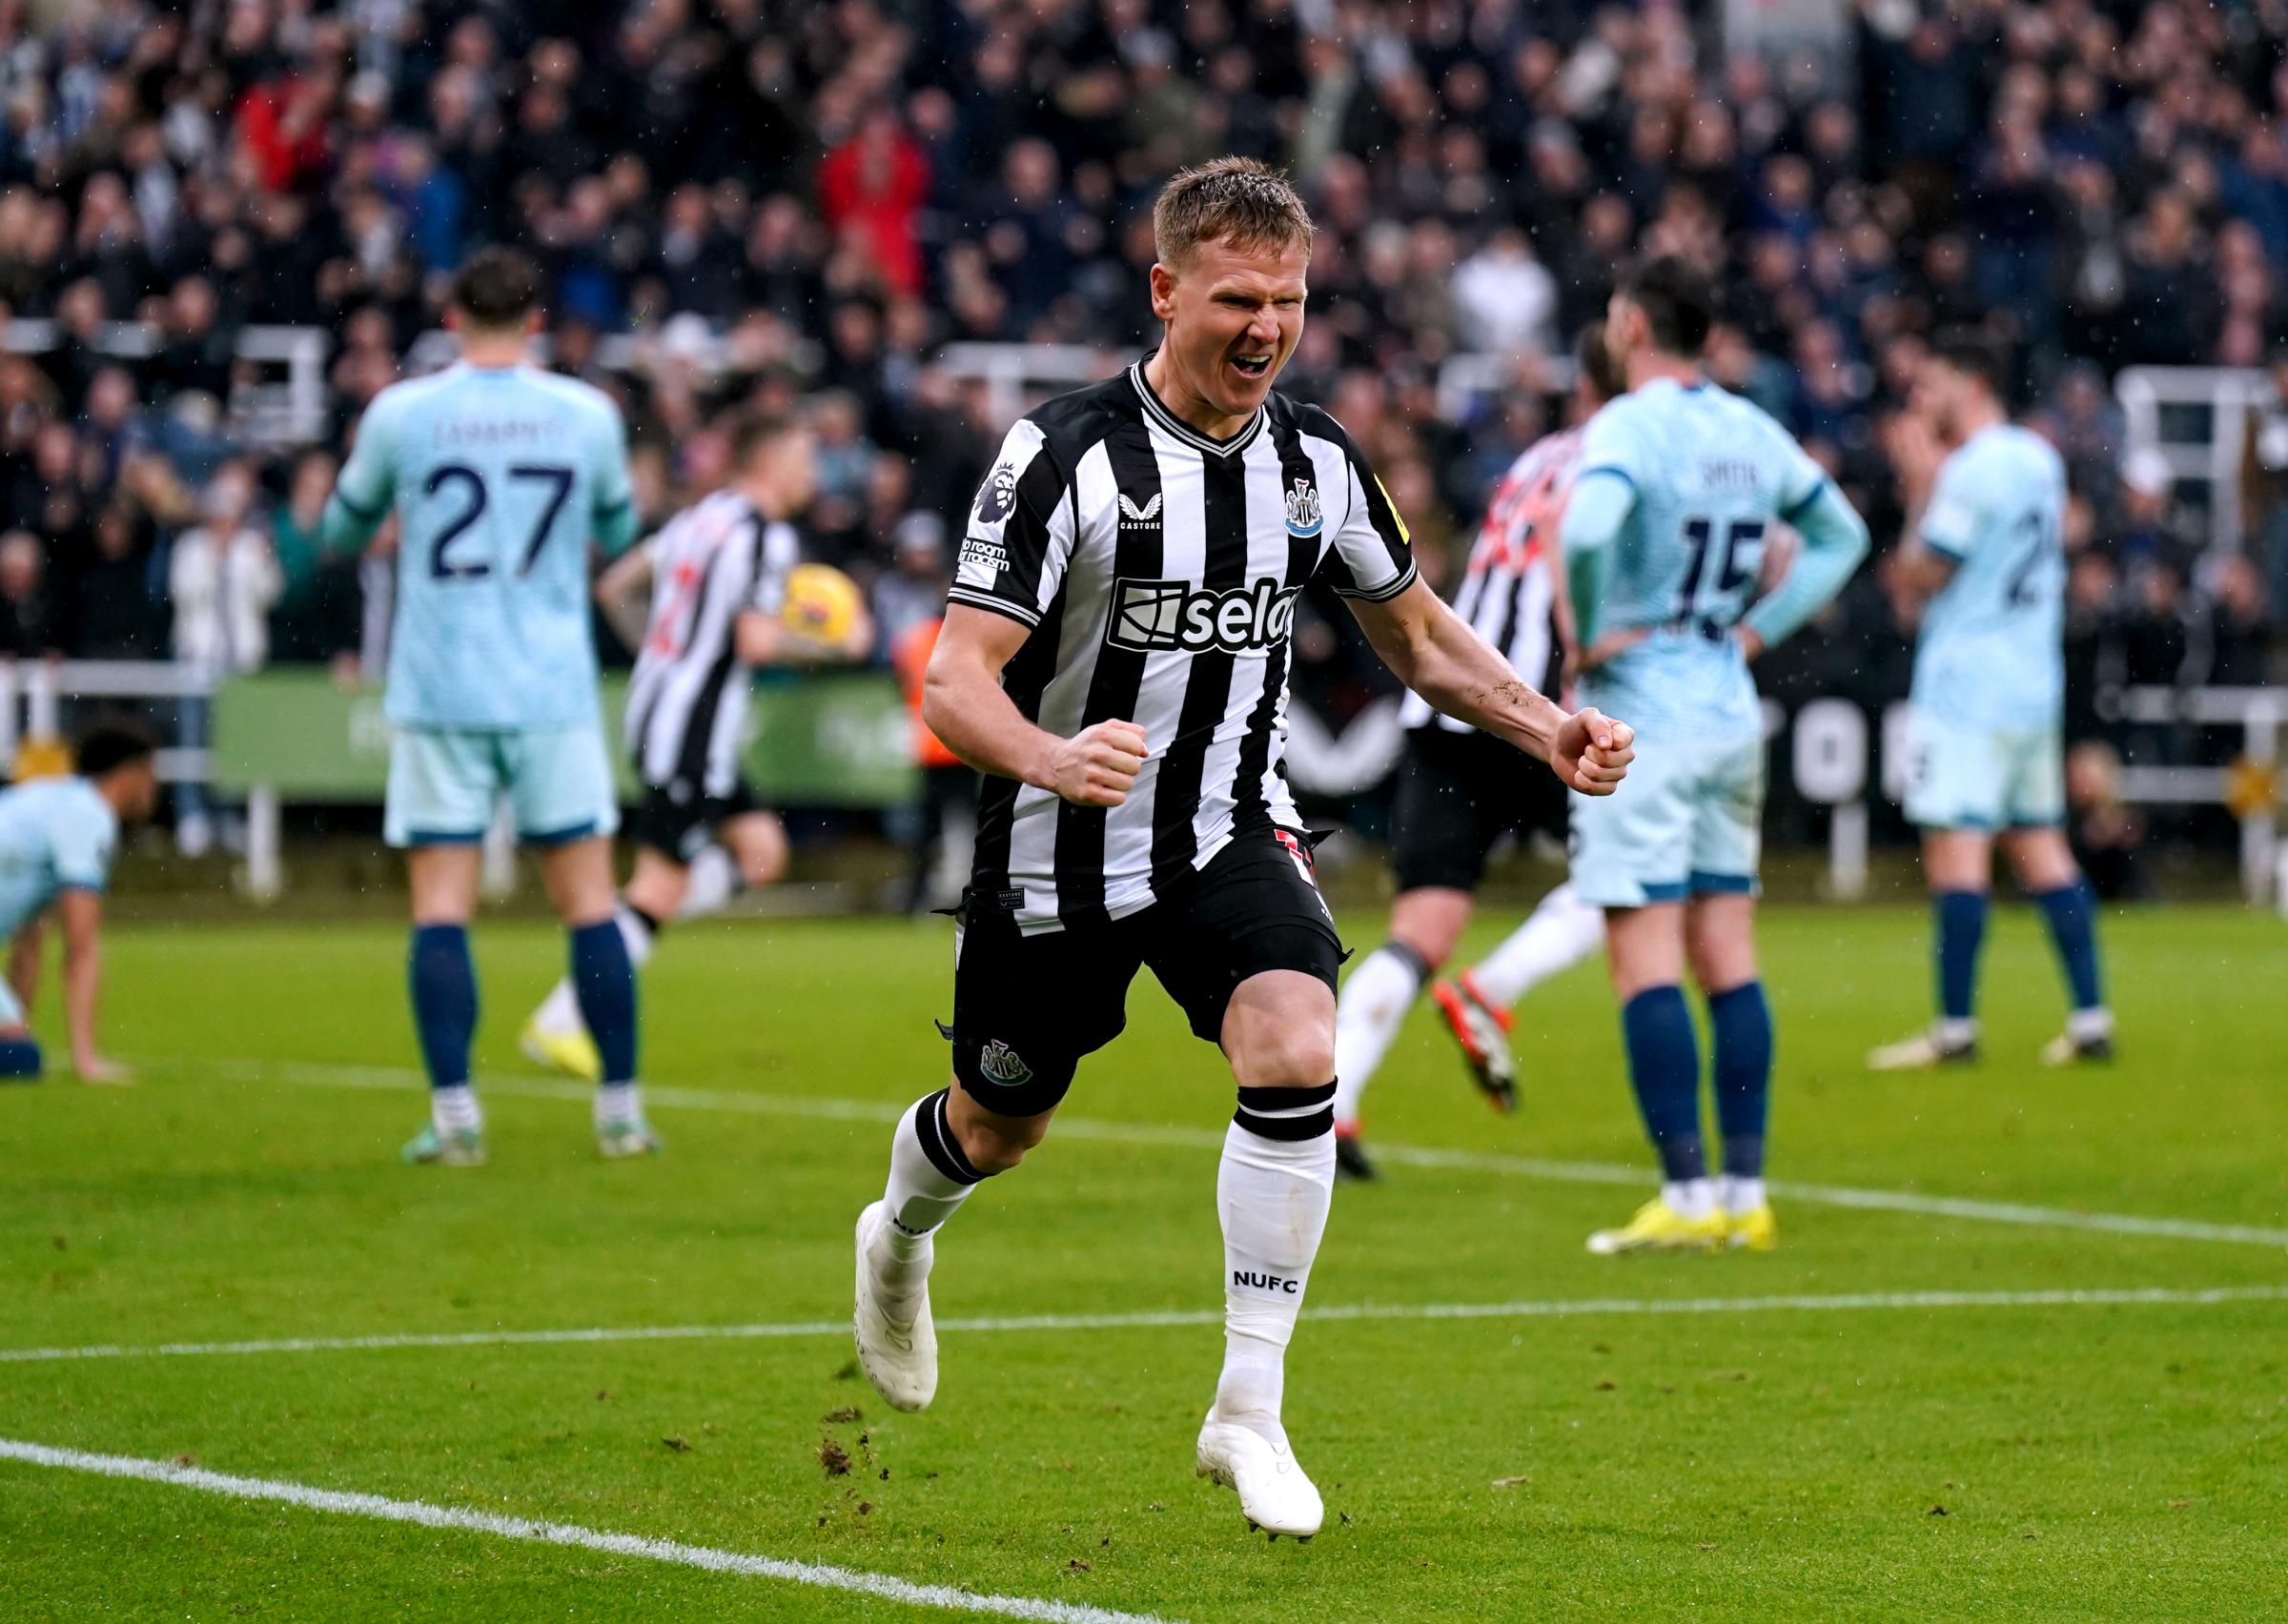 Paul Dummett and Matt Ritchie could be offered Newcastle contracts